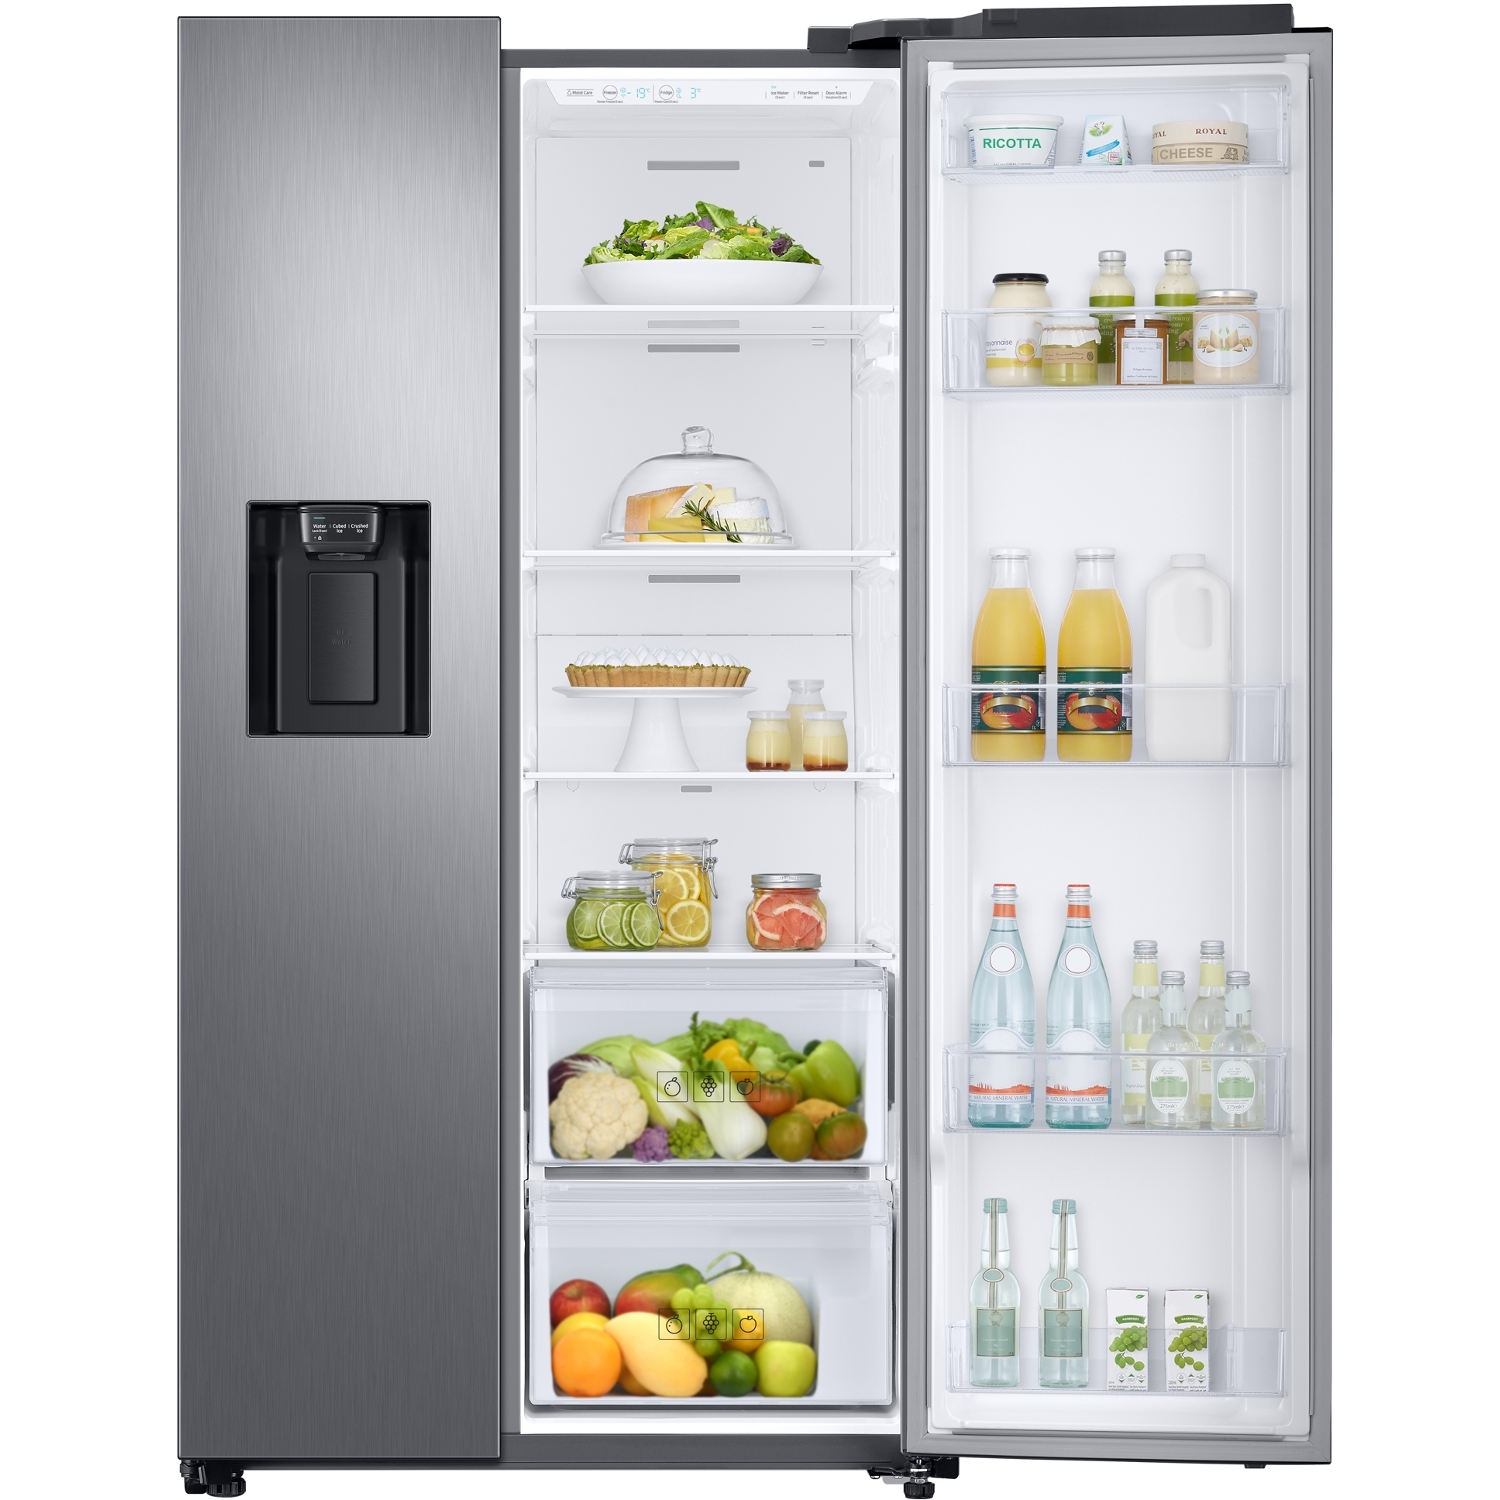 Samsung American Style Fridge Freezer - Silver - A+ Rated - 3